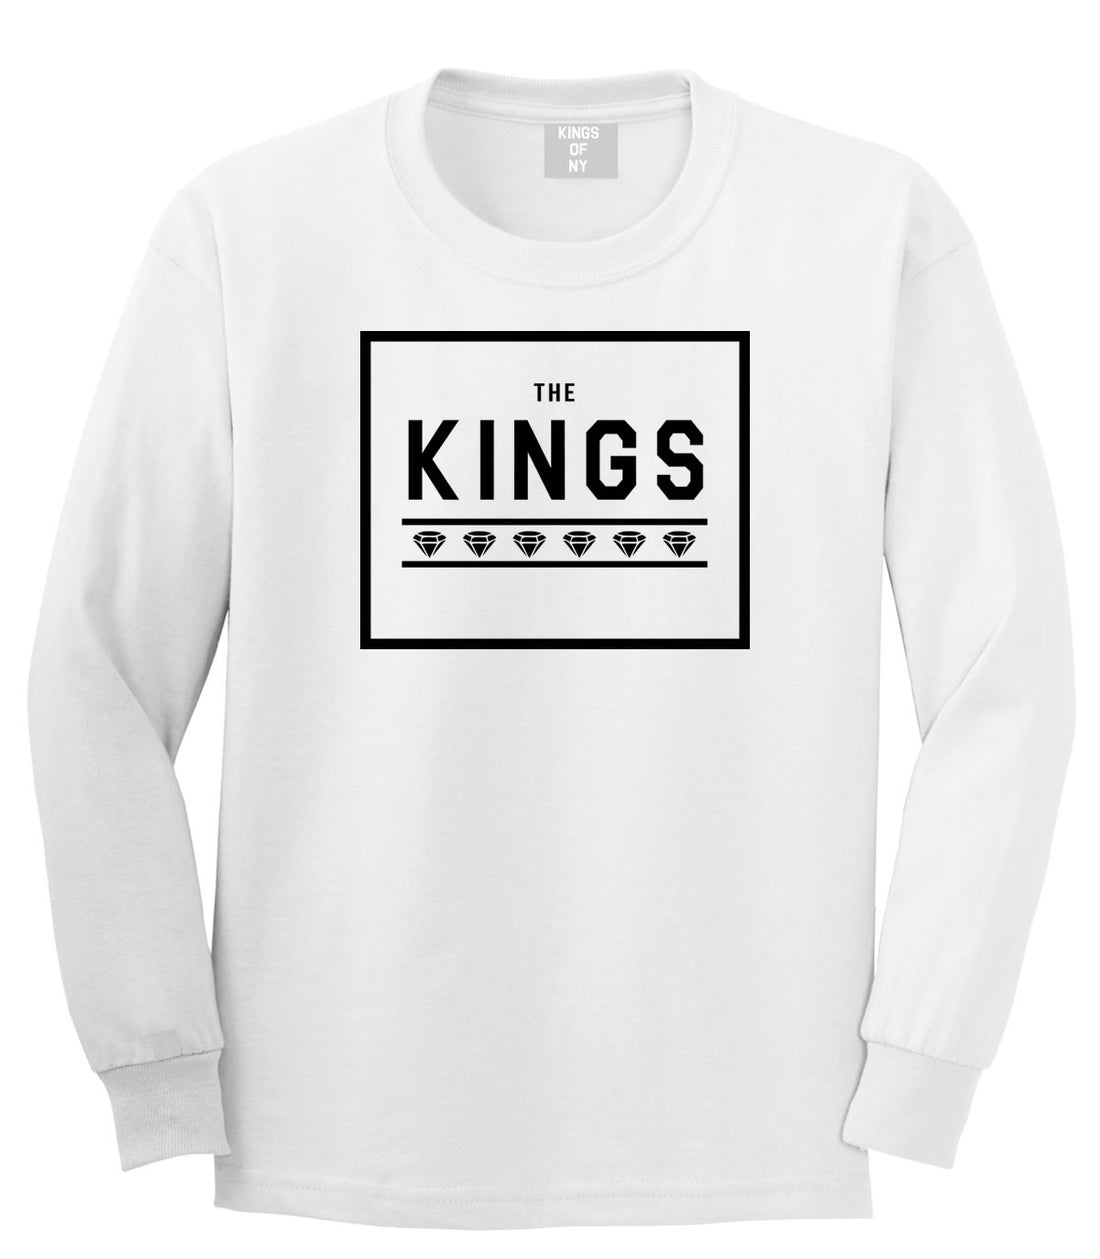 The Kings Diamonds Long Sleeve T-Shirt in White by Kings Of NY